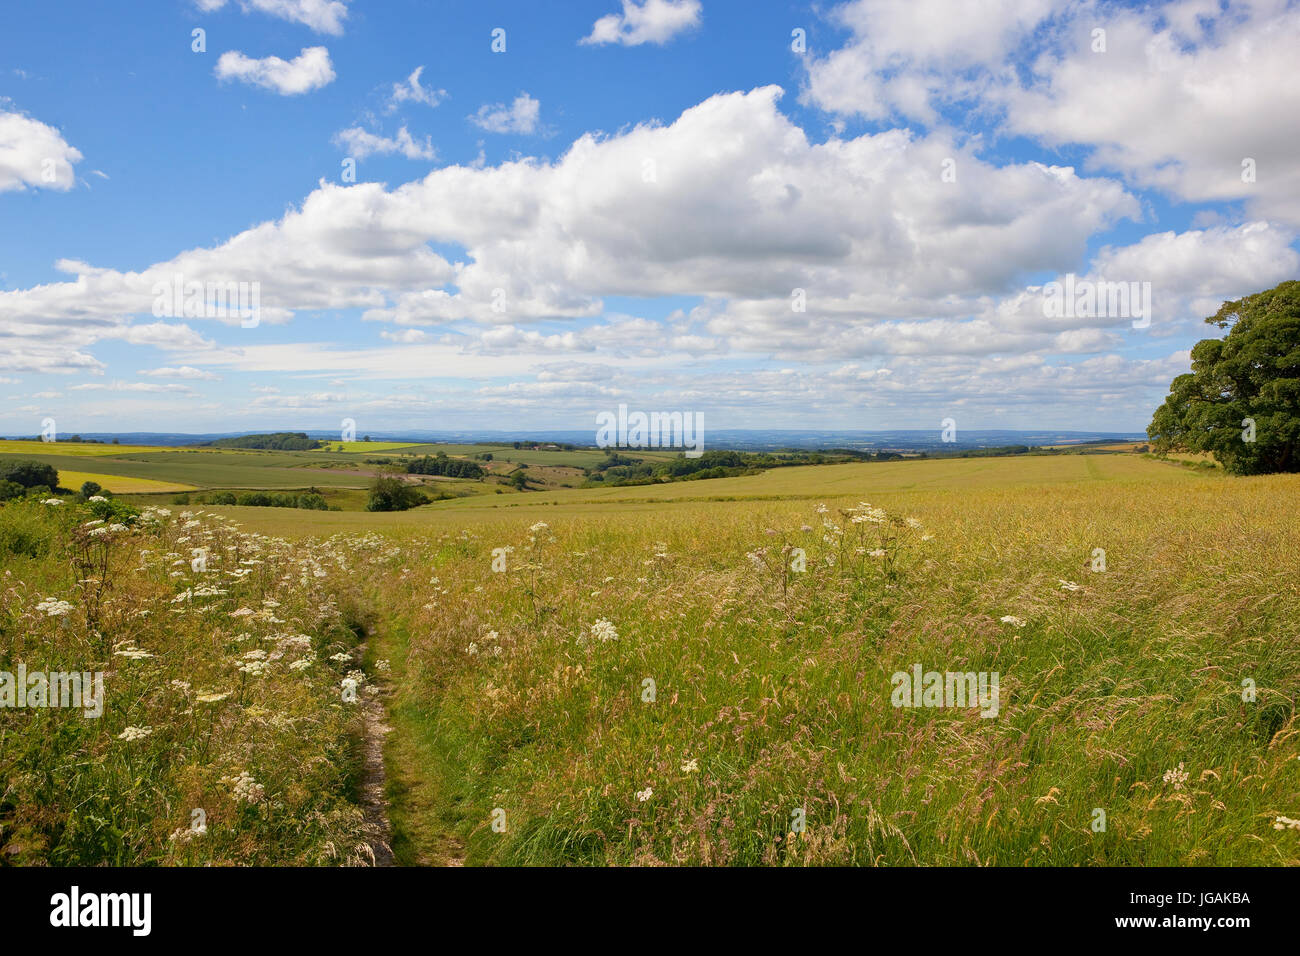 A  yorkshire wolds landscape in summer with patchwork fields and wildflowers under a blue sky with fluffy white clouds Stock Photo